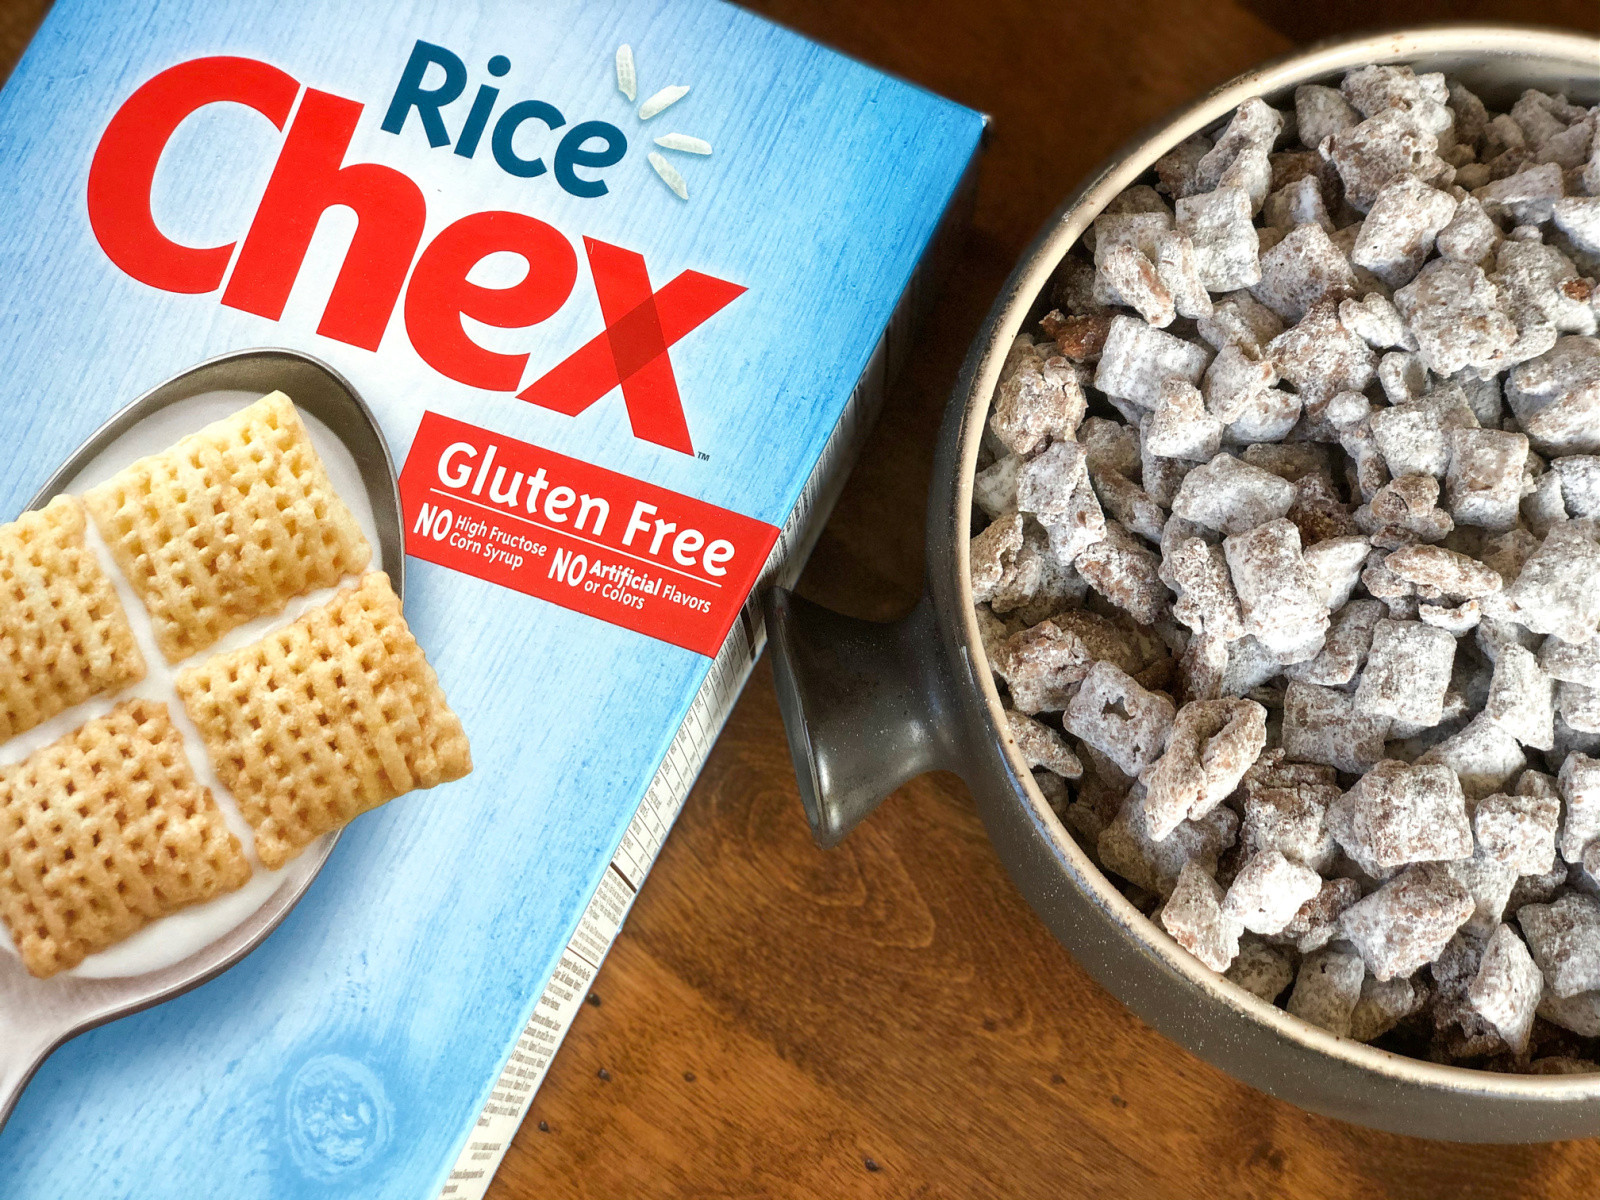 Chex Cereal As Low As $1.49 Per Box At Kroger